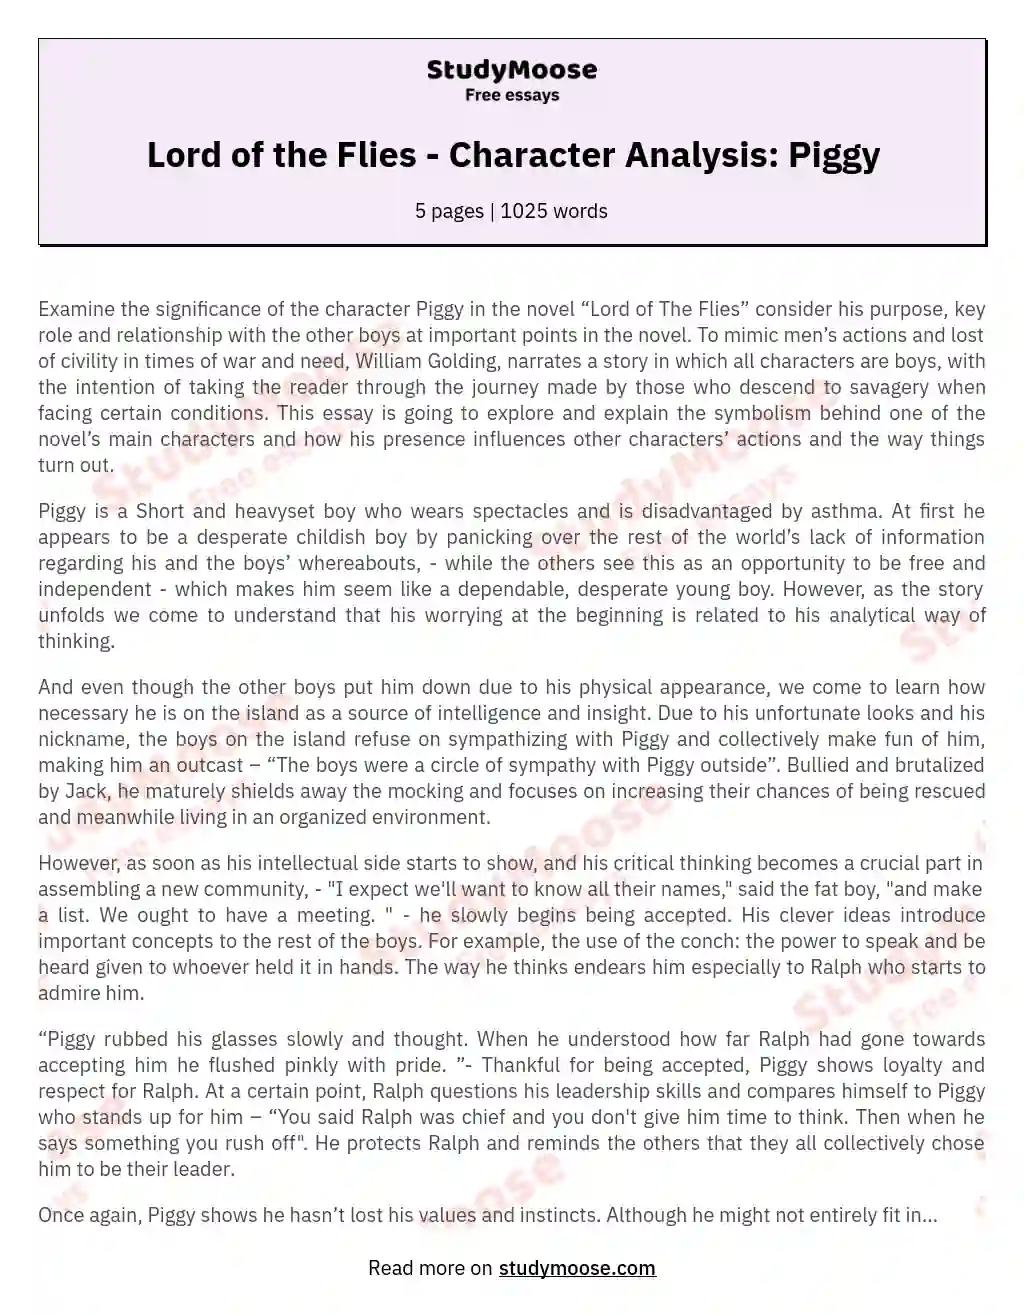 lord of the flies piggy essay